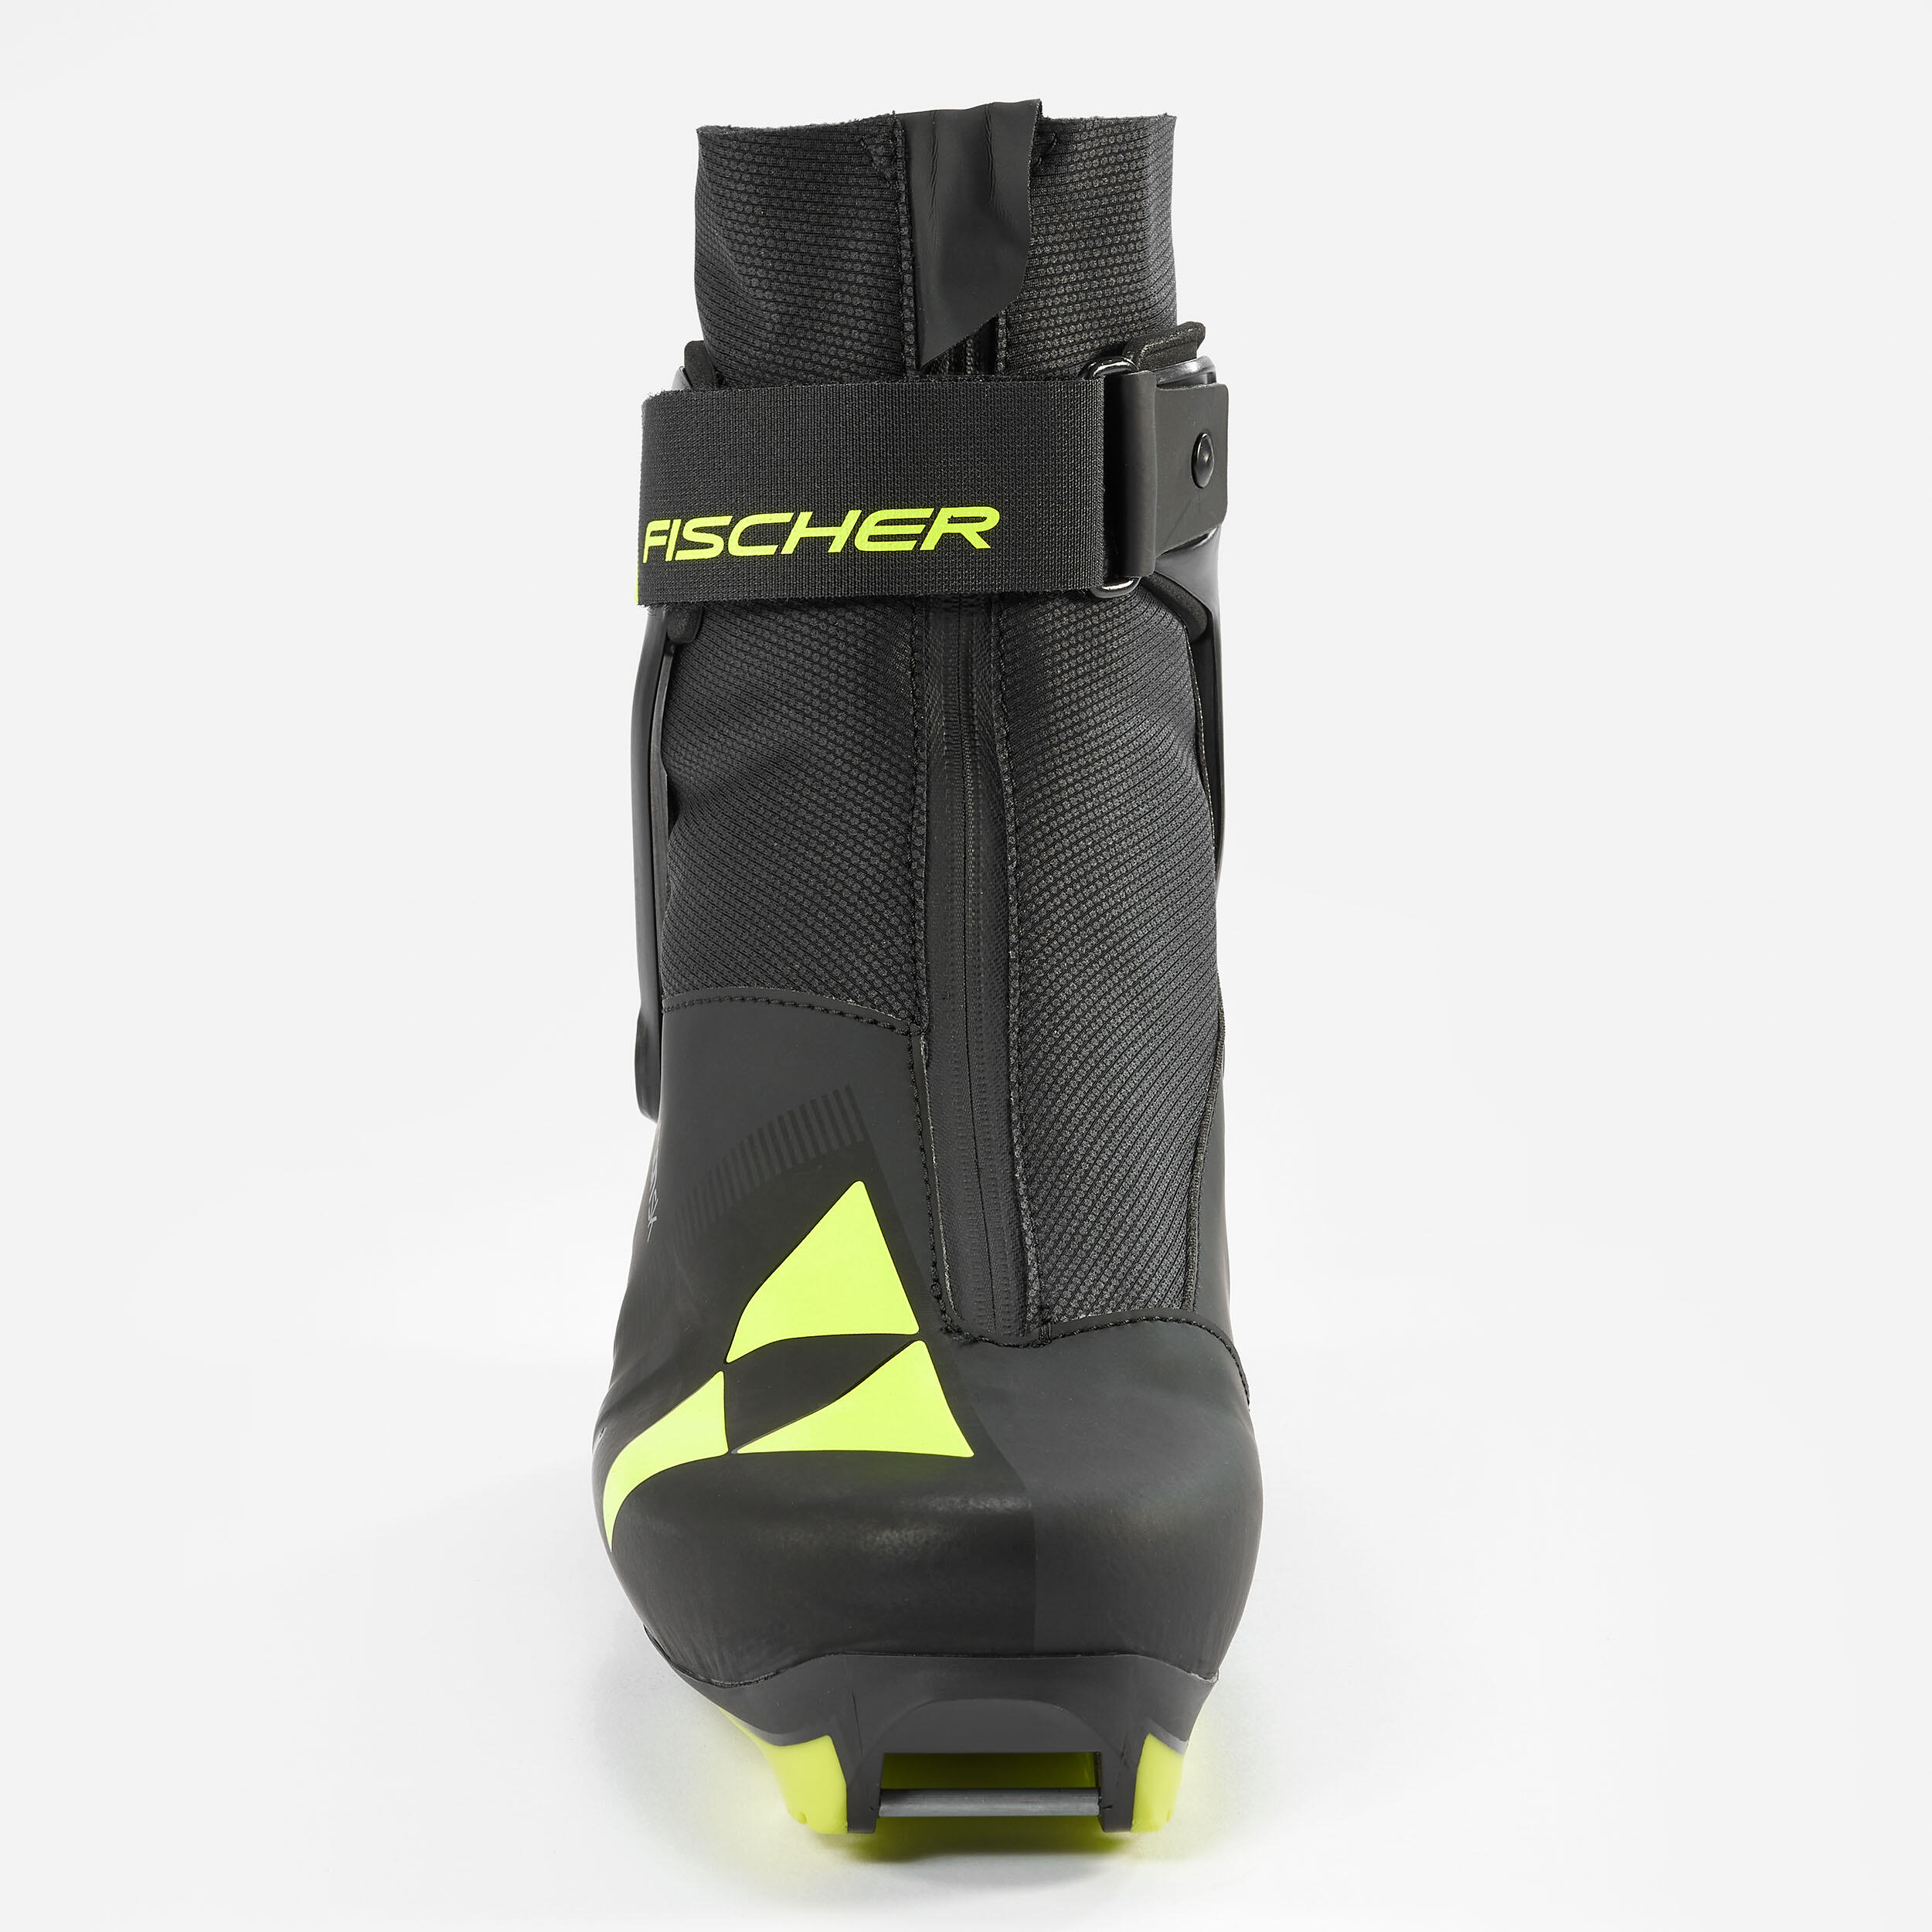 CROSS-COUNTRY SKI SKATING BOOTS - FISCHER CARBON 4/7